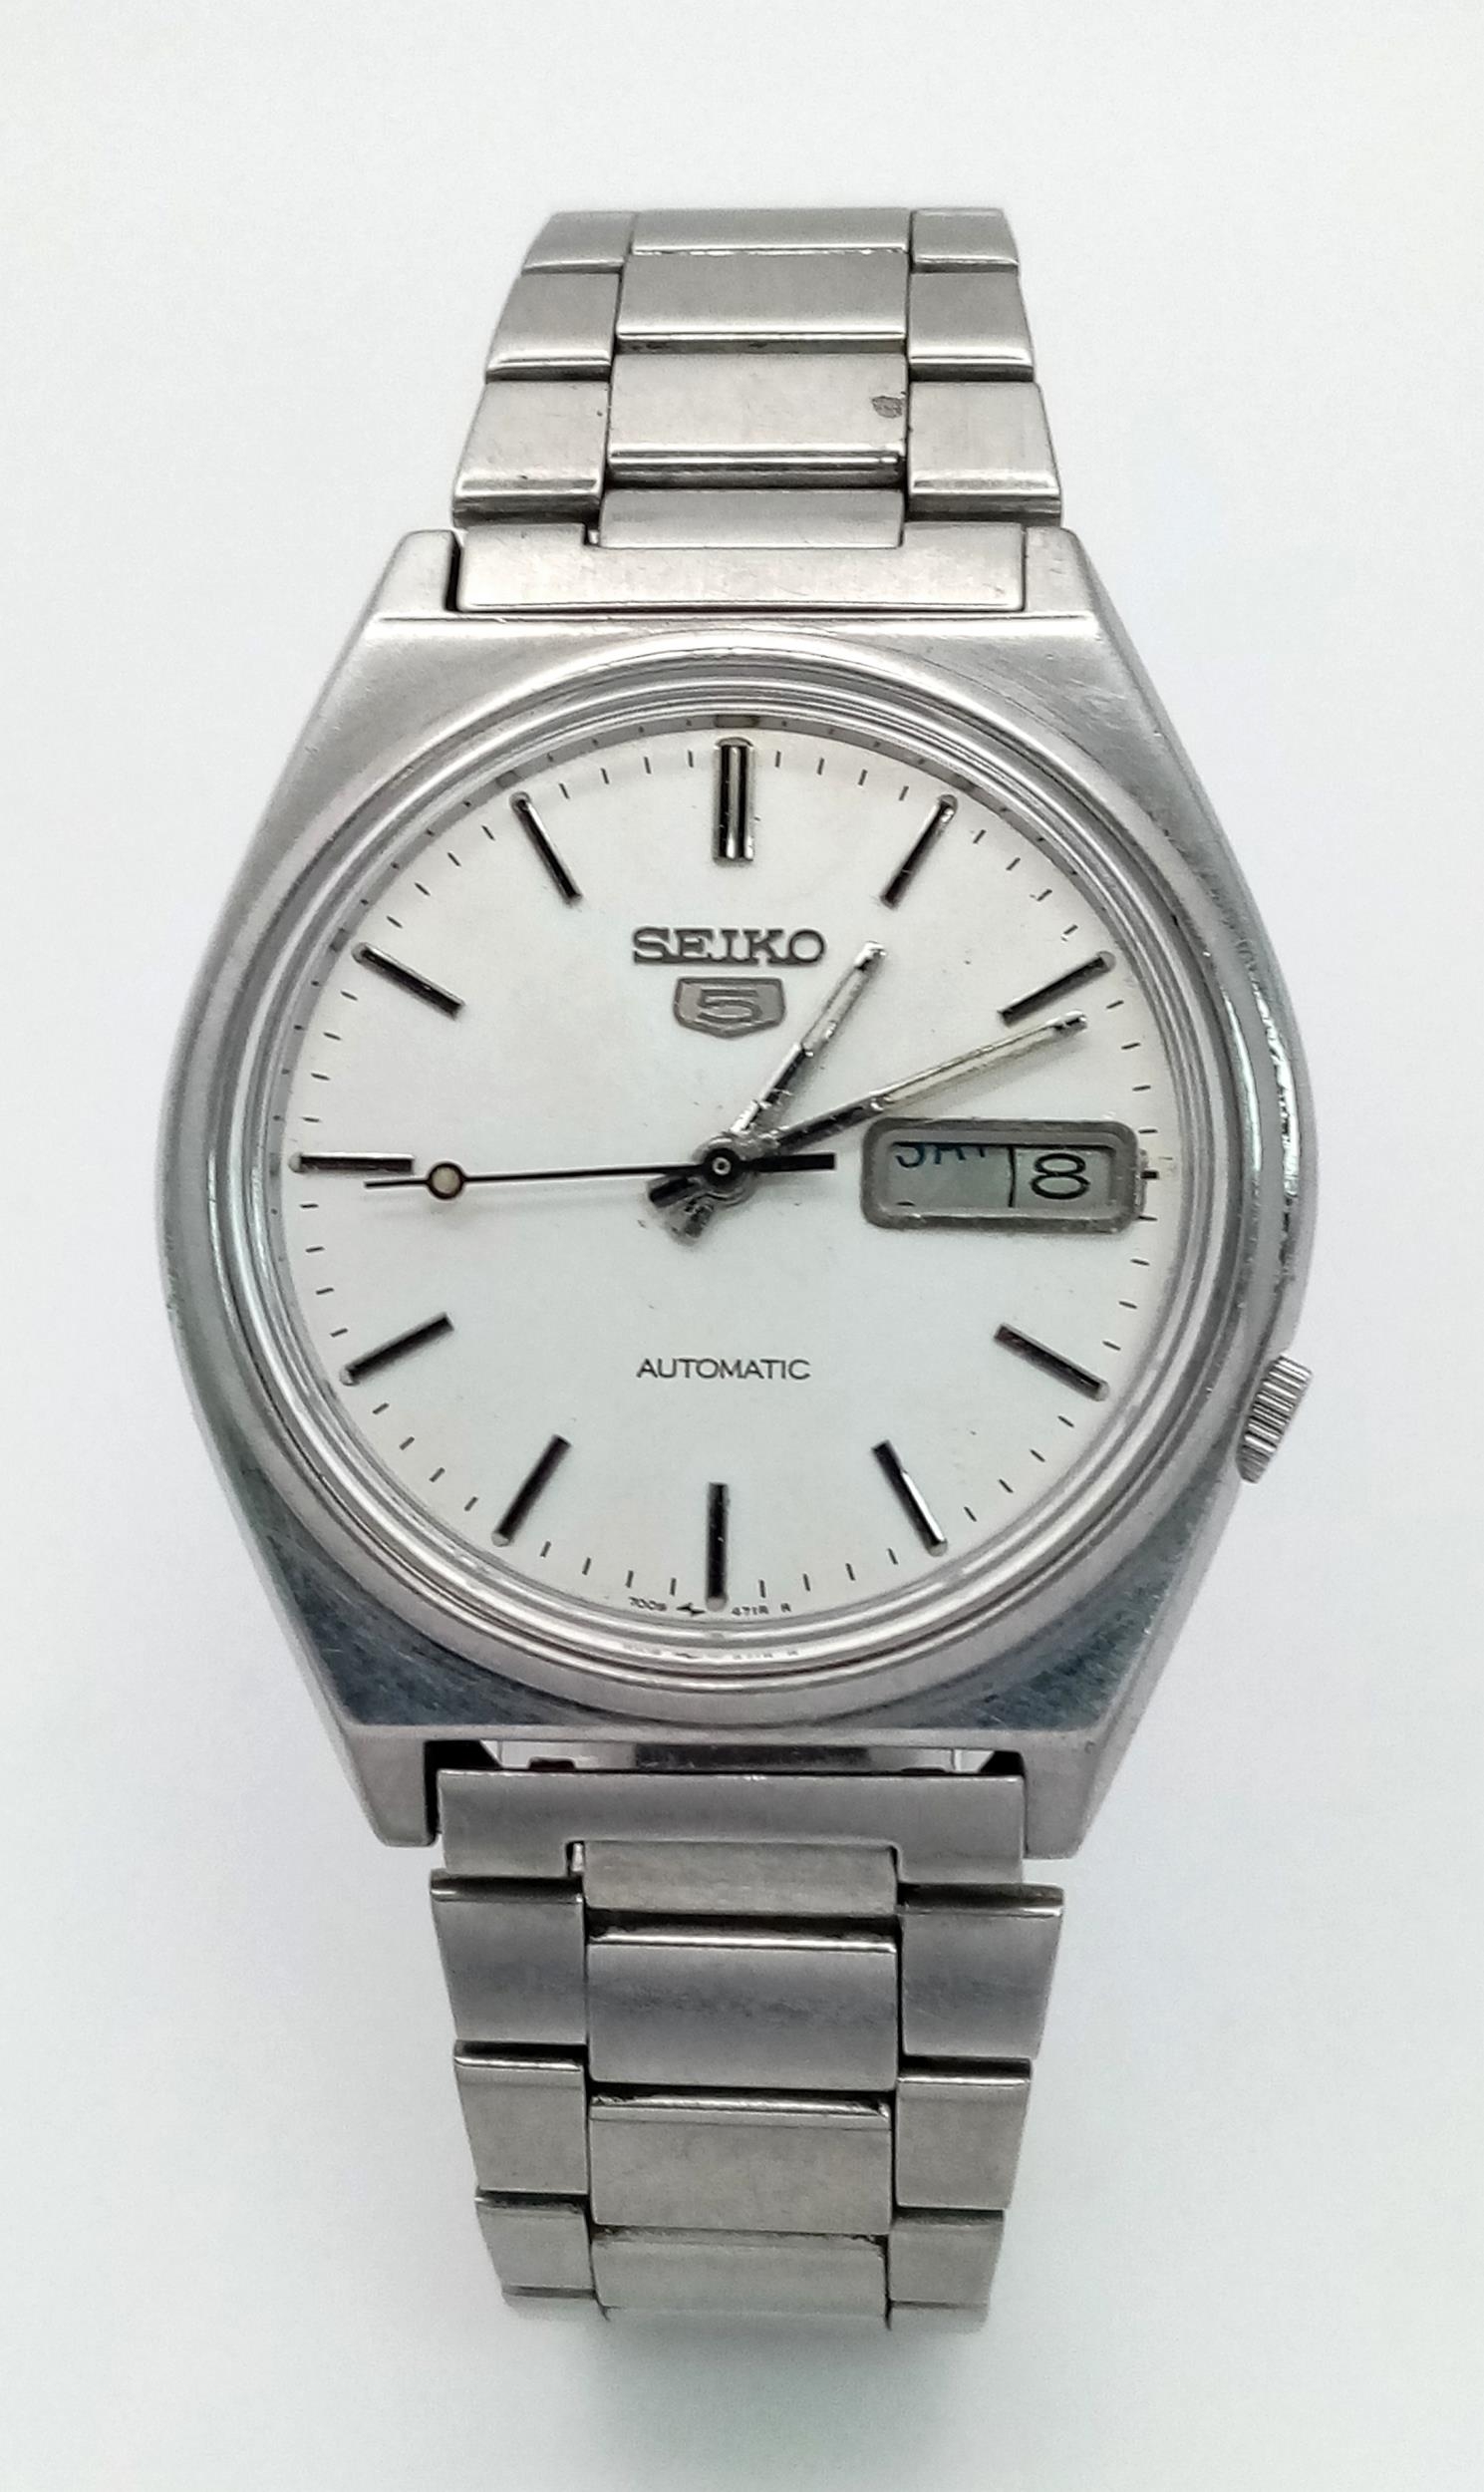 A Vintage Seiko 5 Automatic Gents Watch. Stainless steel bracelet and case - 37mm. Silver tone - Image 2 of 7